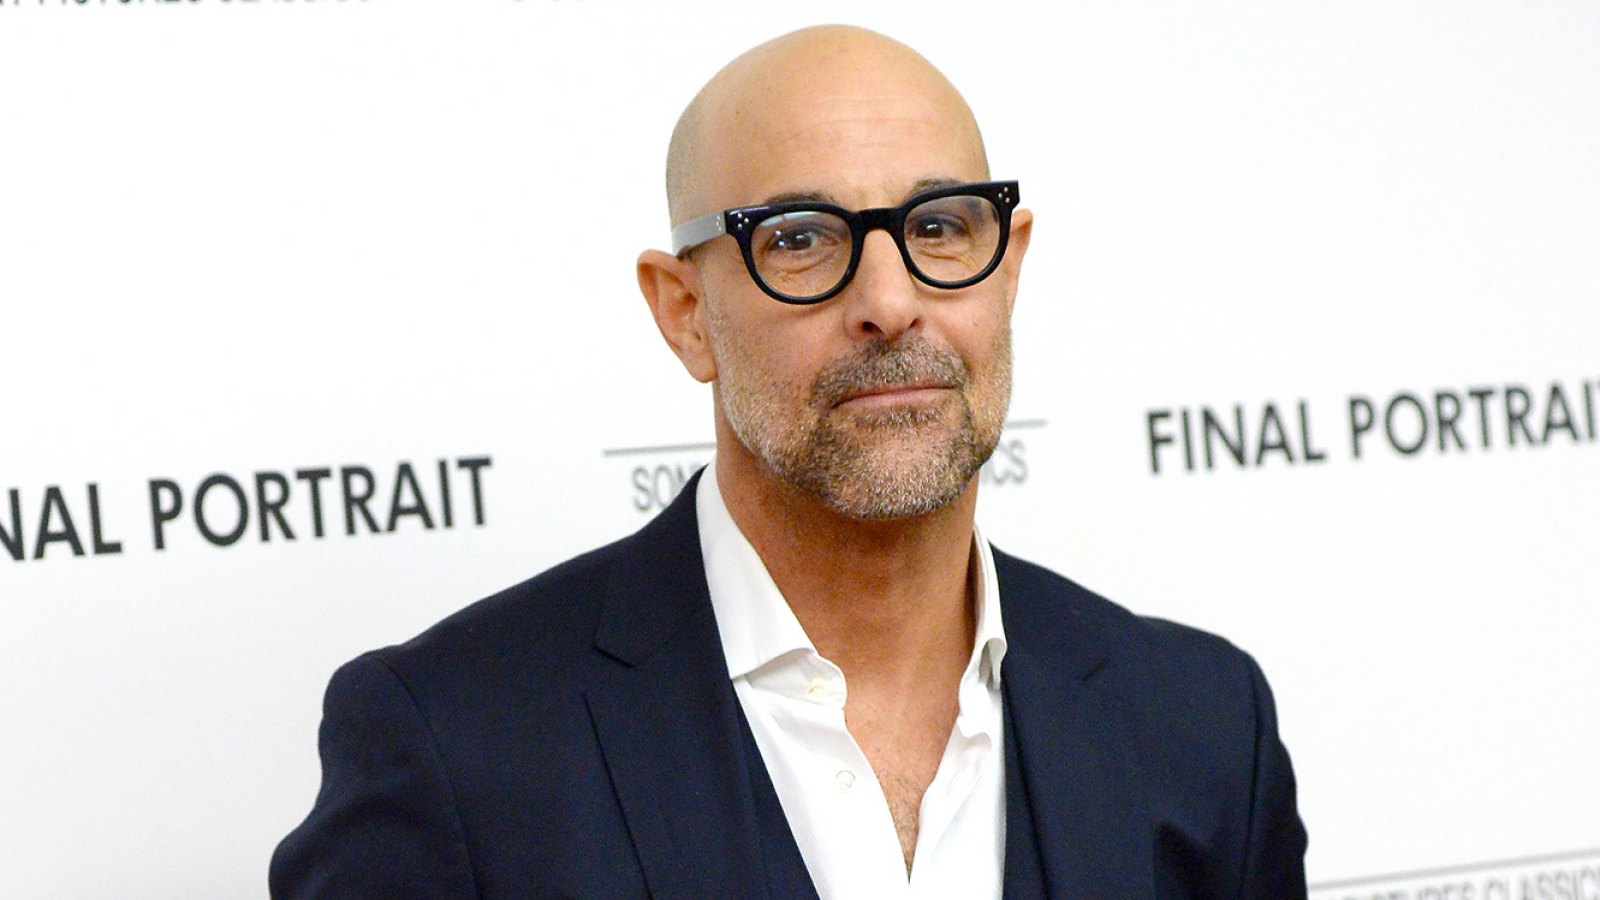 Stanley Tucci Opens Up About Cancer Battle Three Years Ago: ‘I Had a Feeding Tube for Six Months’